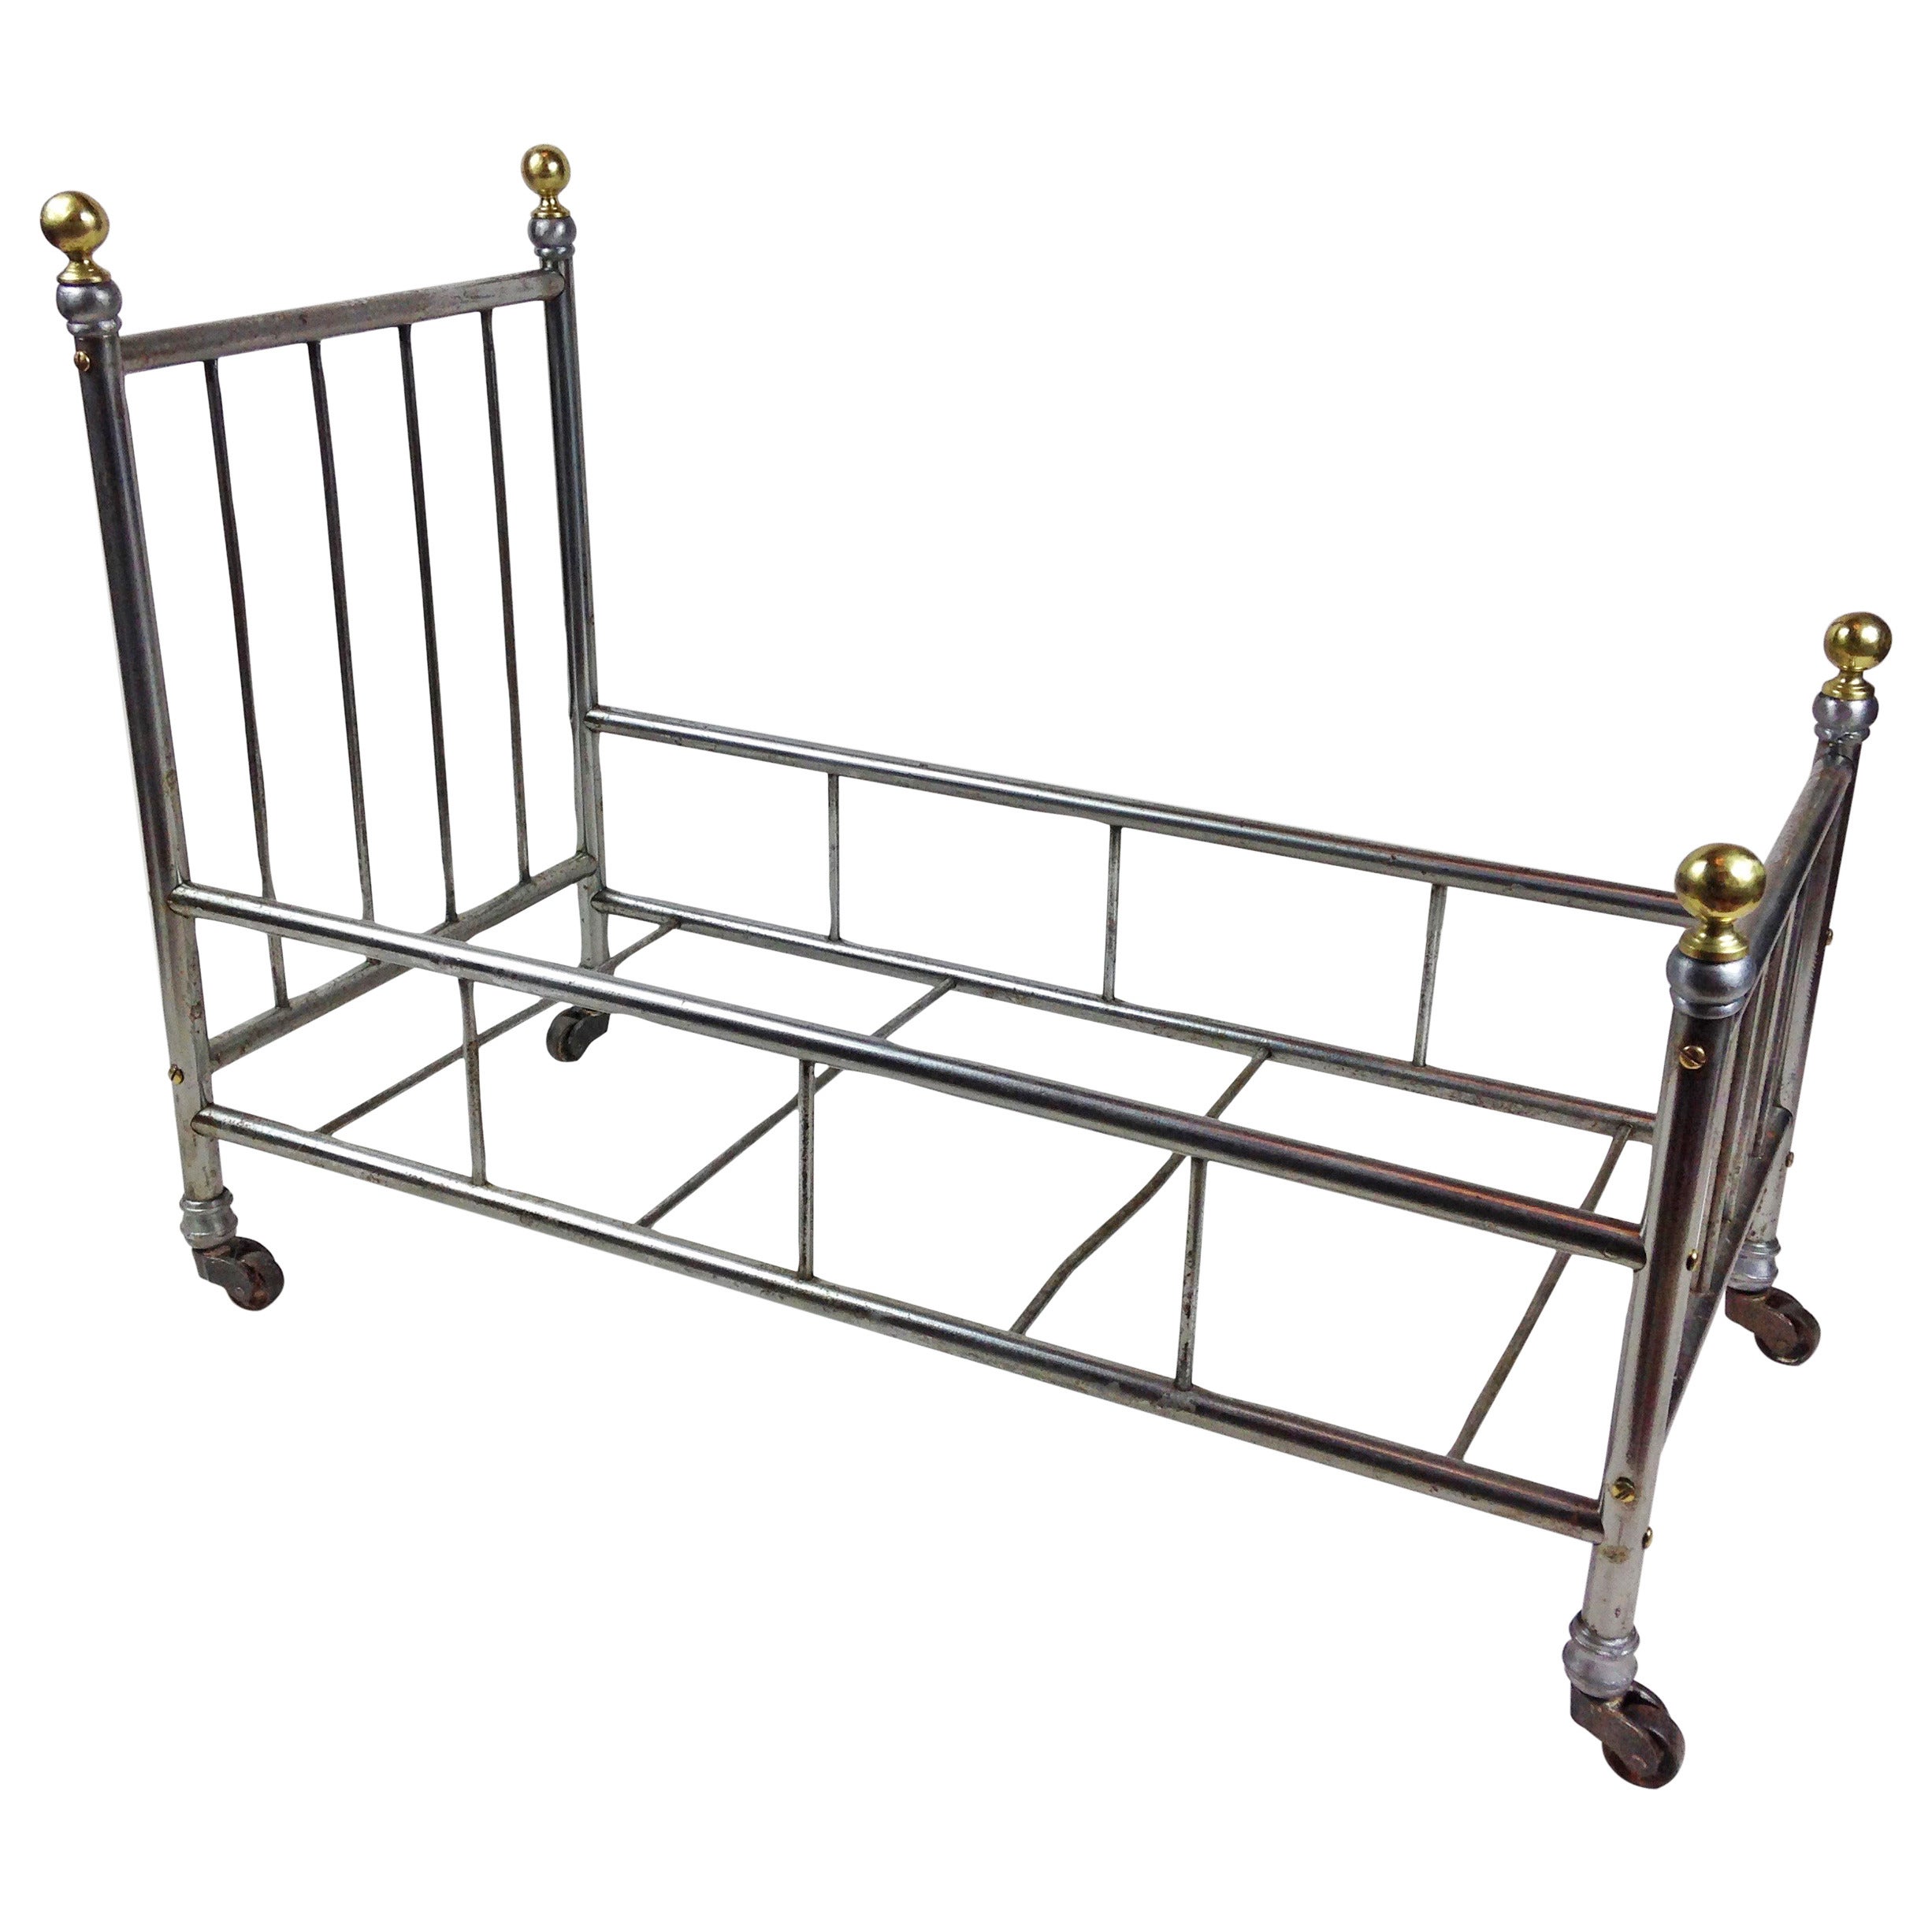 Wonderful Miniature Antique Metal Bed Frame on Casters For Sale